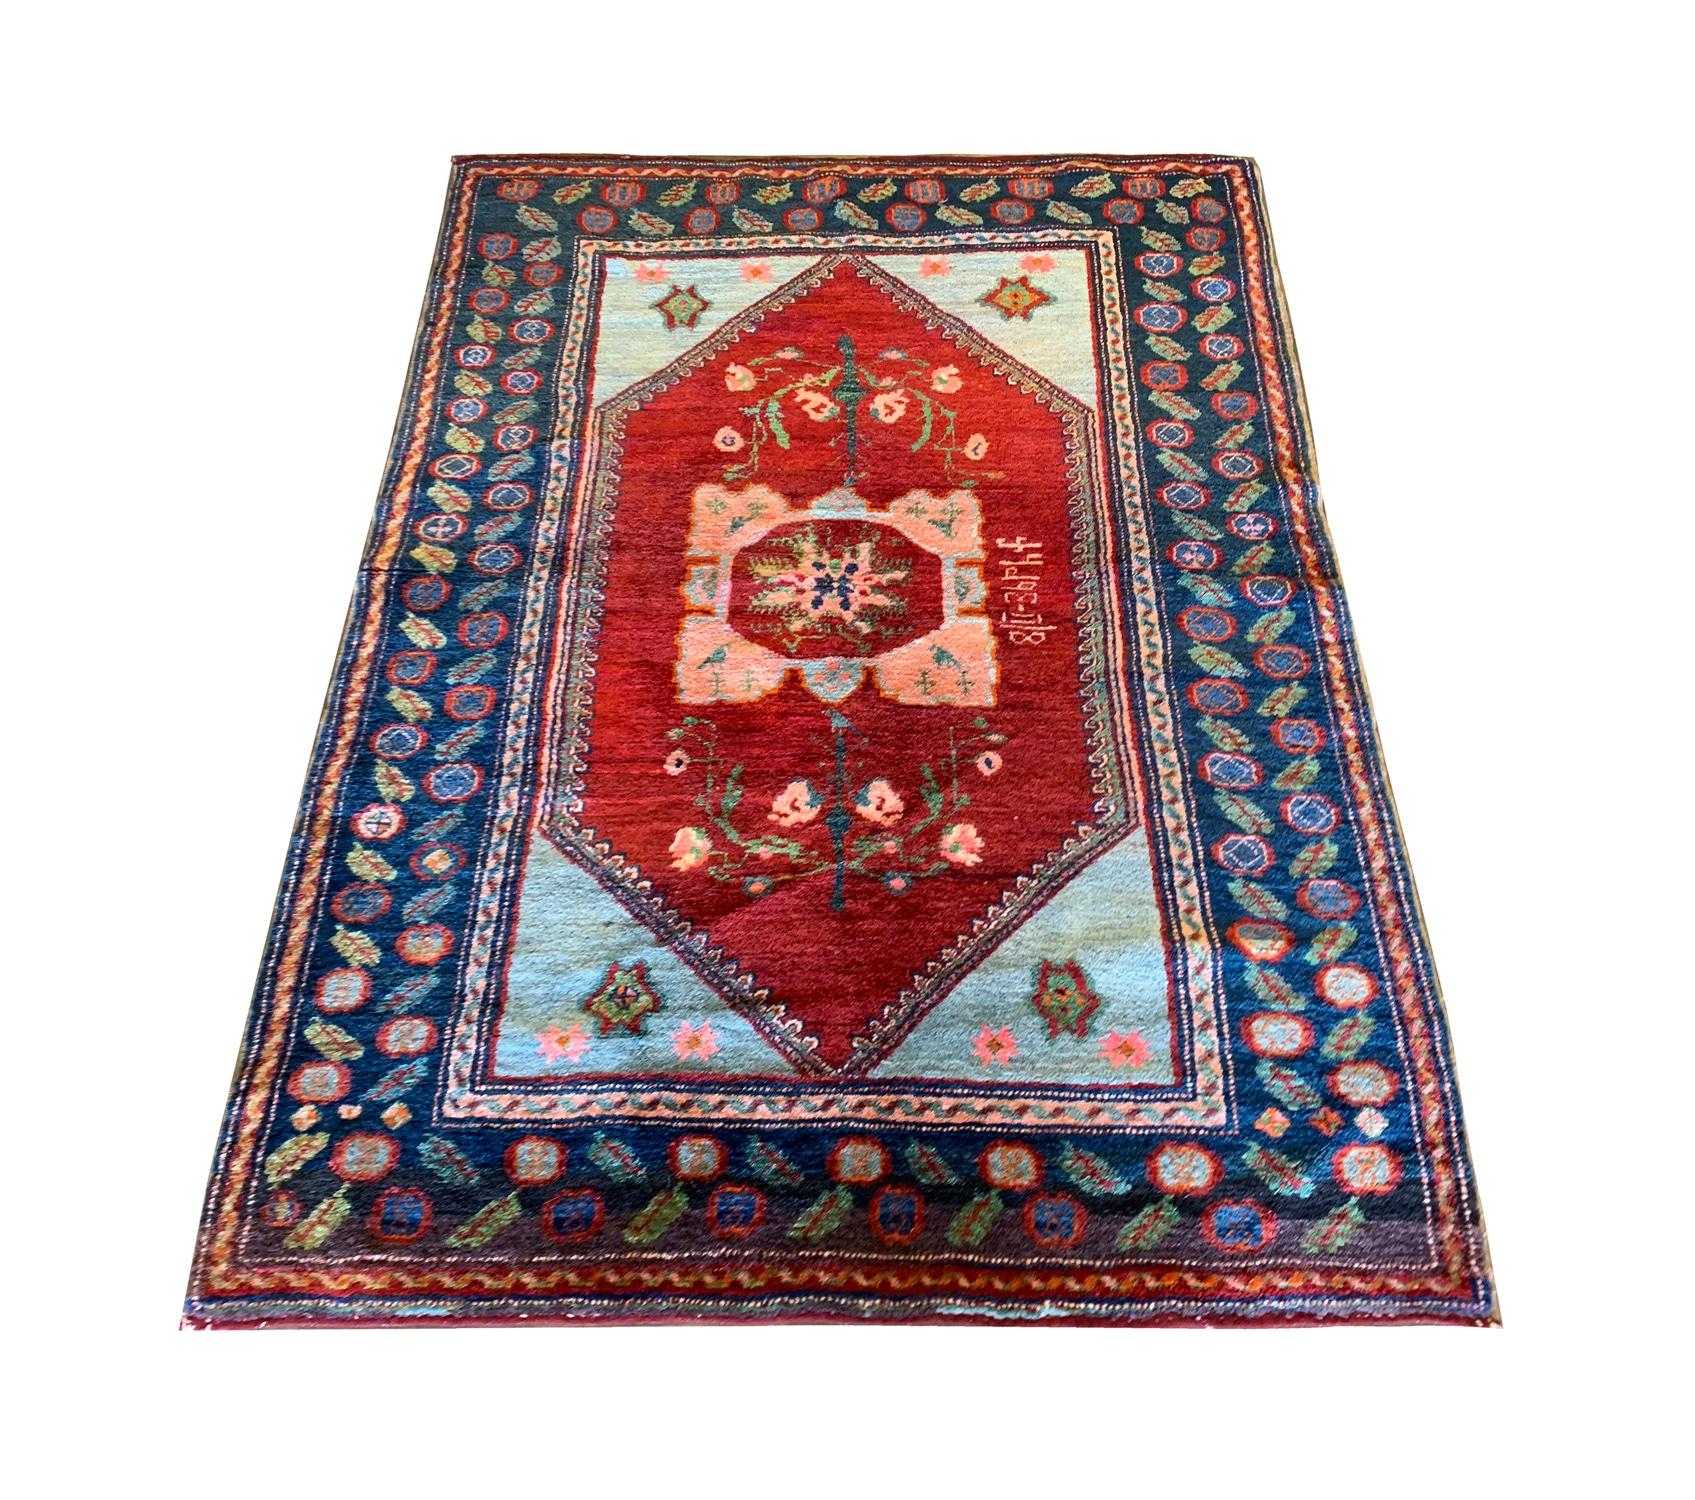 Introducing our exquisite antique collectible armenian rug, a true treasure immersed in history. Crafted with meticulous care in the 1880s, this small sized wool rug showcases the timeless artistry of armenian weaving. Hand-knotted to perfection, it